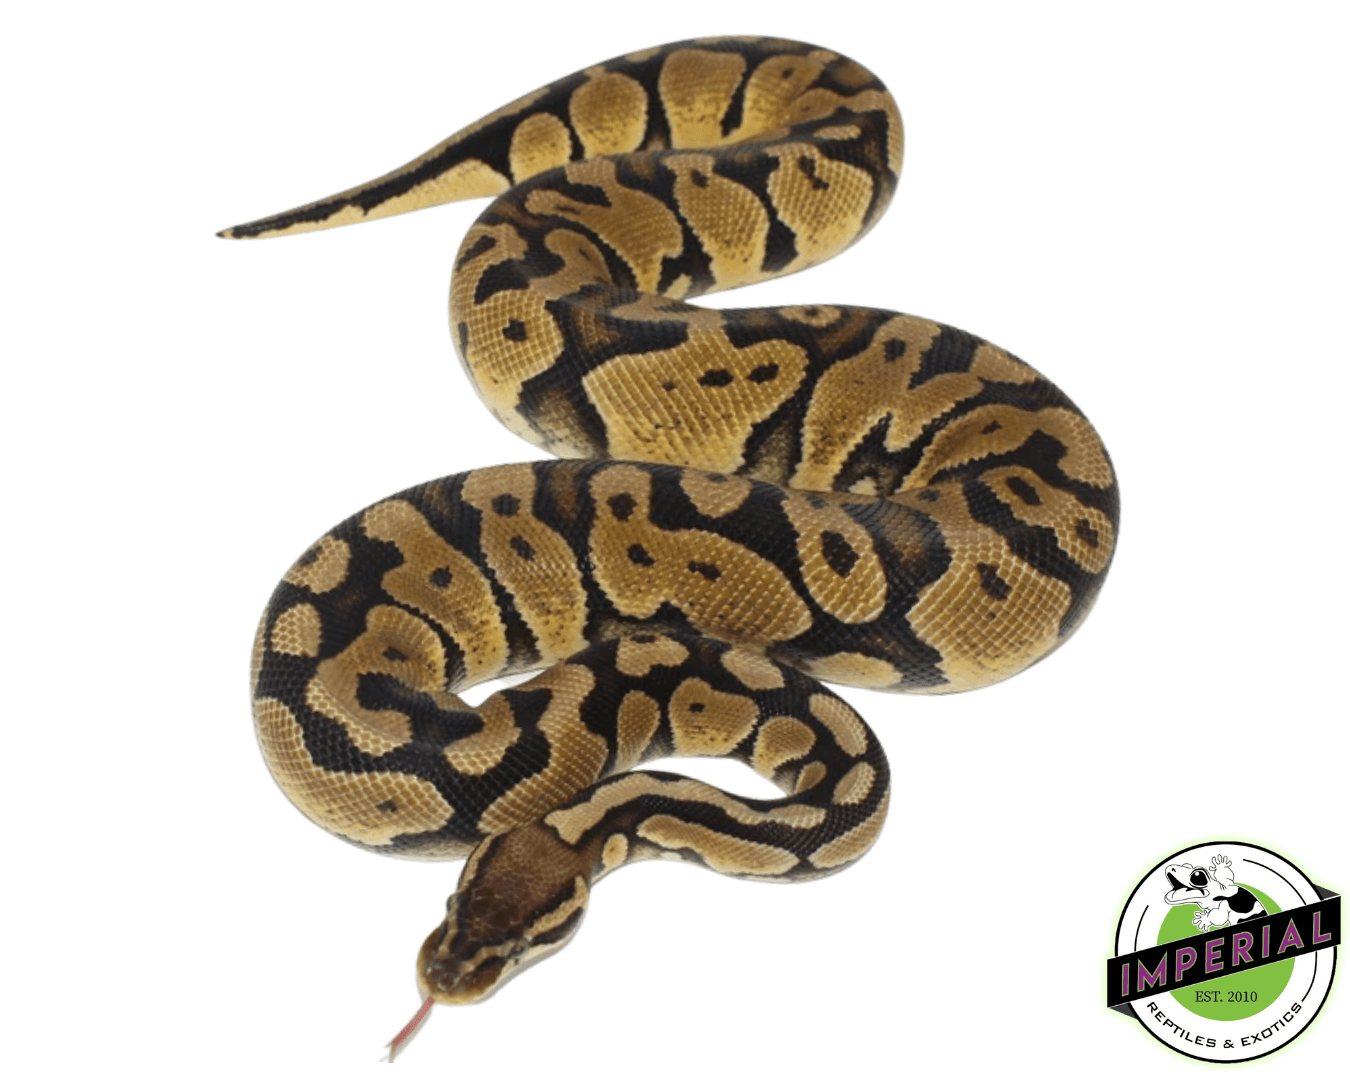 pastel adult ball python for sale, buy reptiles online